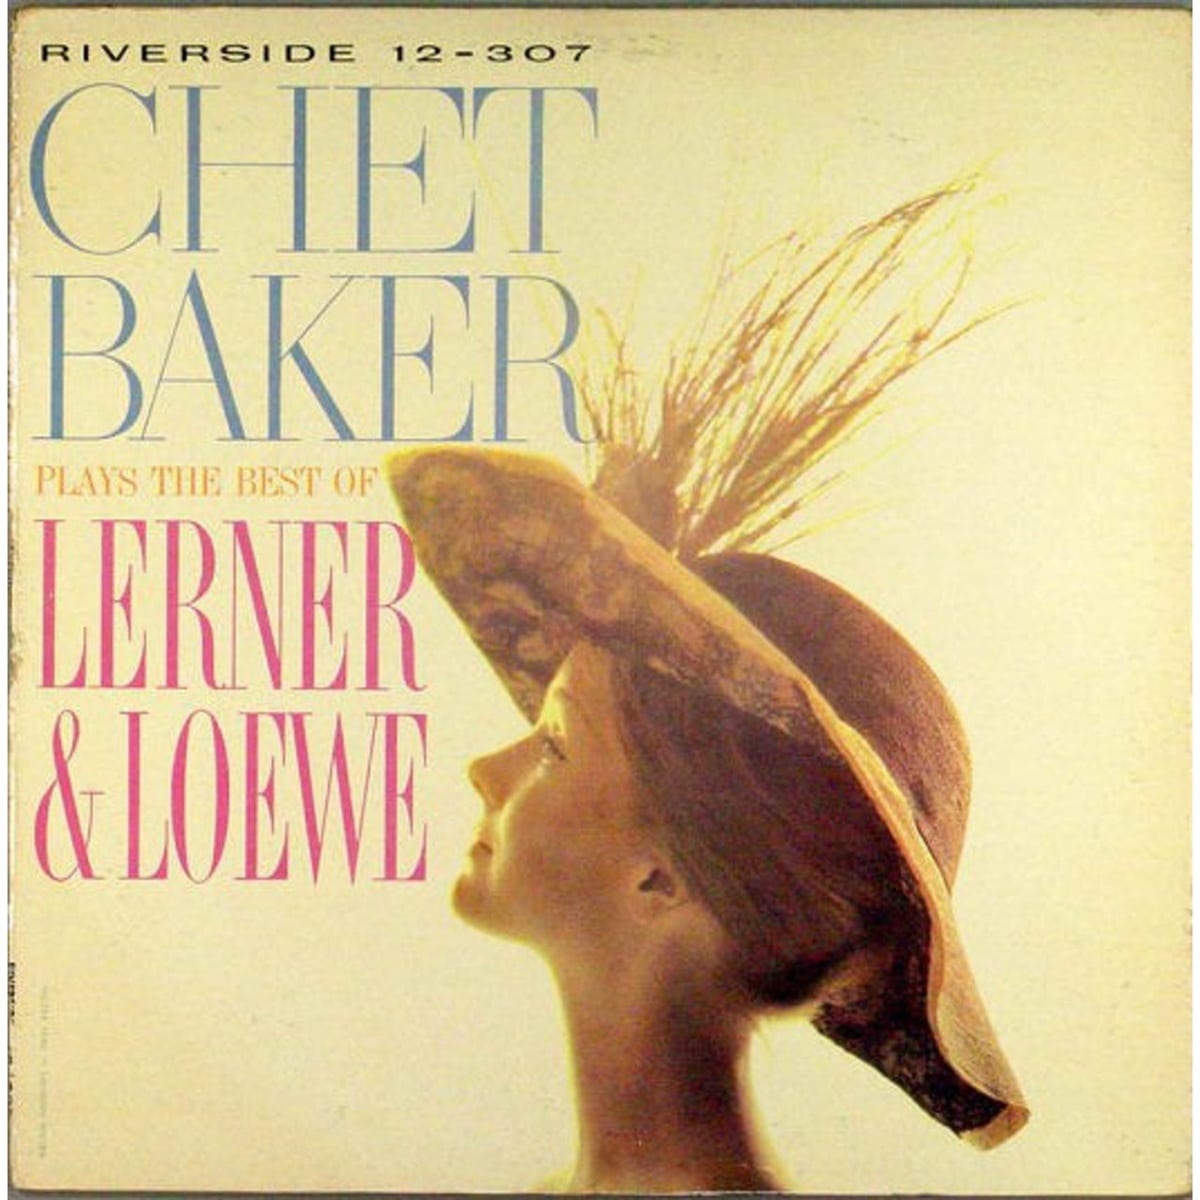 Chet Baker - Plays The Best Of Lerner And Loewe